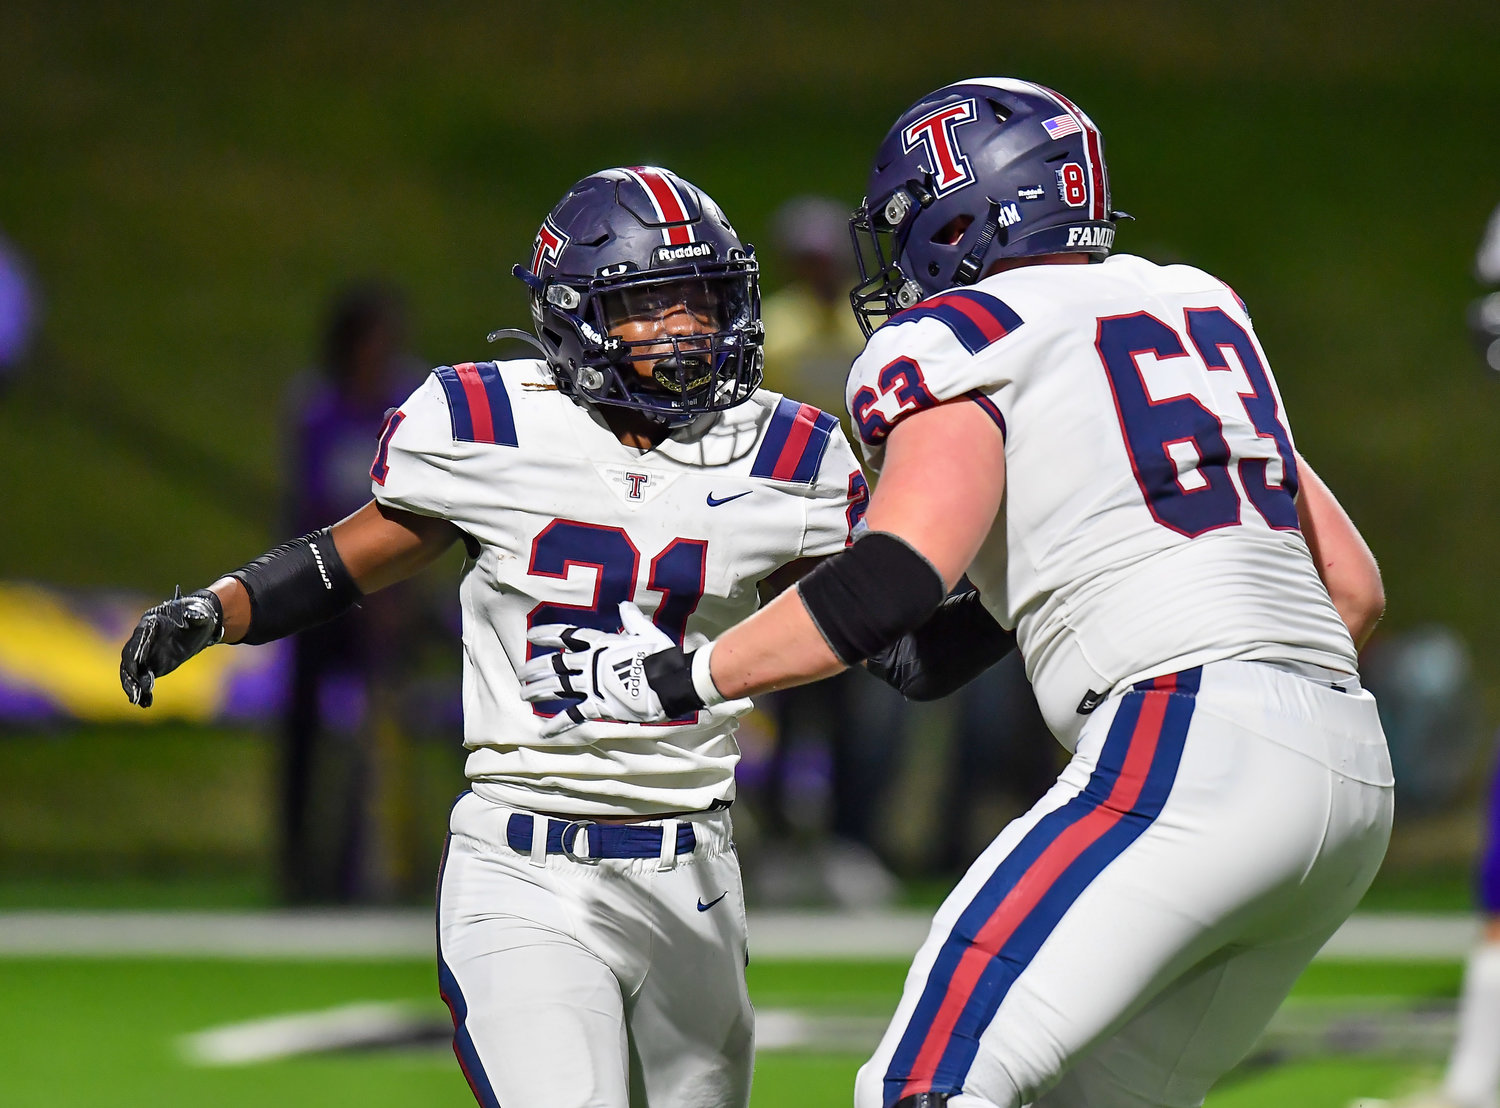 Houston Tx. Nov 19, 2021, 2021: Tompkins #21 Caleb Blocker celebrates a TD with #63 Ashton Funk during the UIL area playoff game between Tompkins and Jersey Village at Pridgeon Stadium in Houston.. (Photo by Mark Goodman / Katy Times)